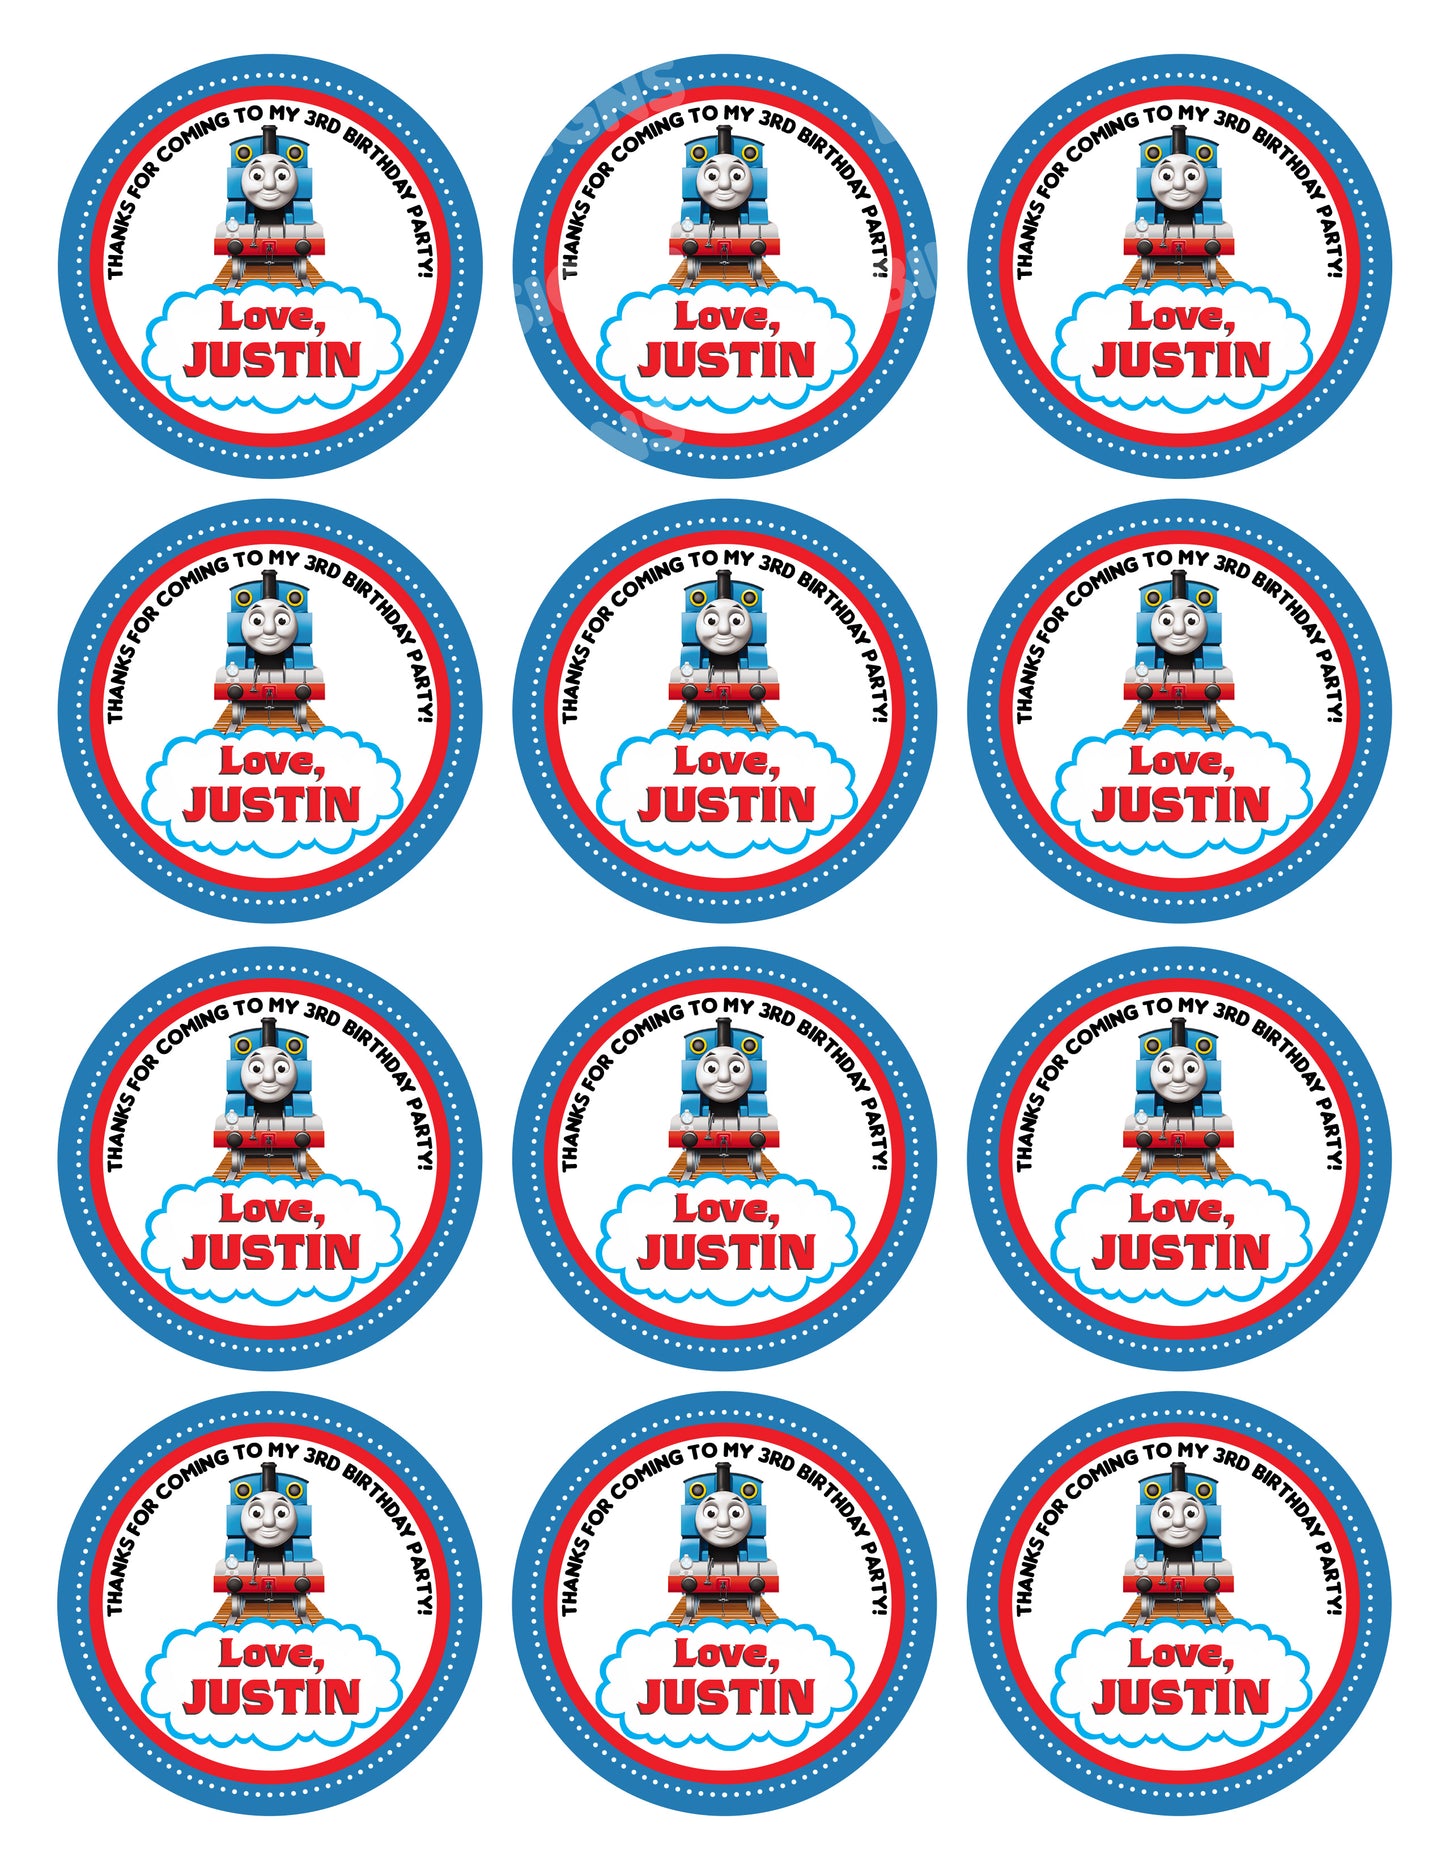 THOMAS THE TRAIN Personalized Stickers for Gift Bags, Party Favors! Printed or Digital!